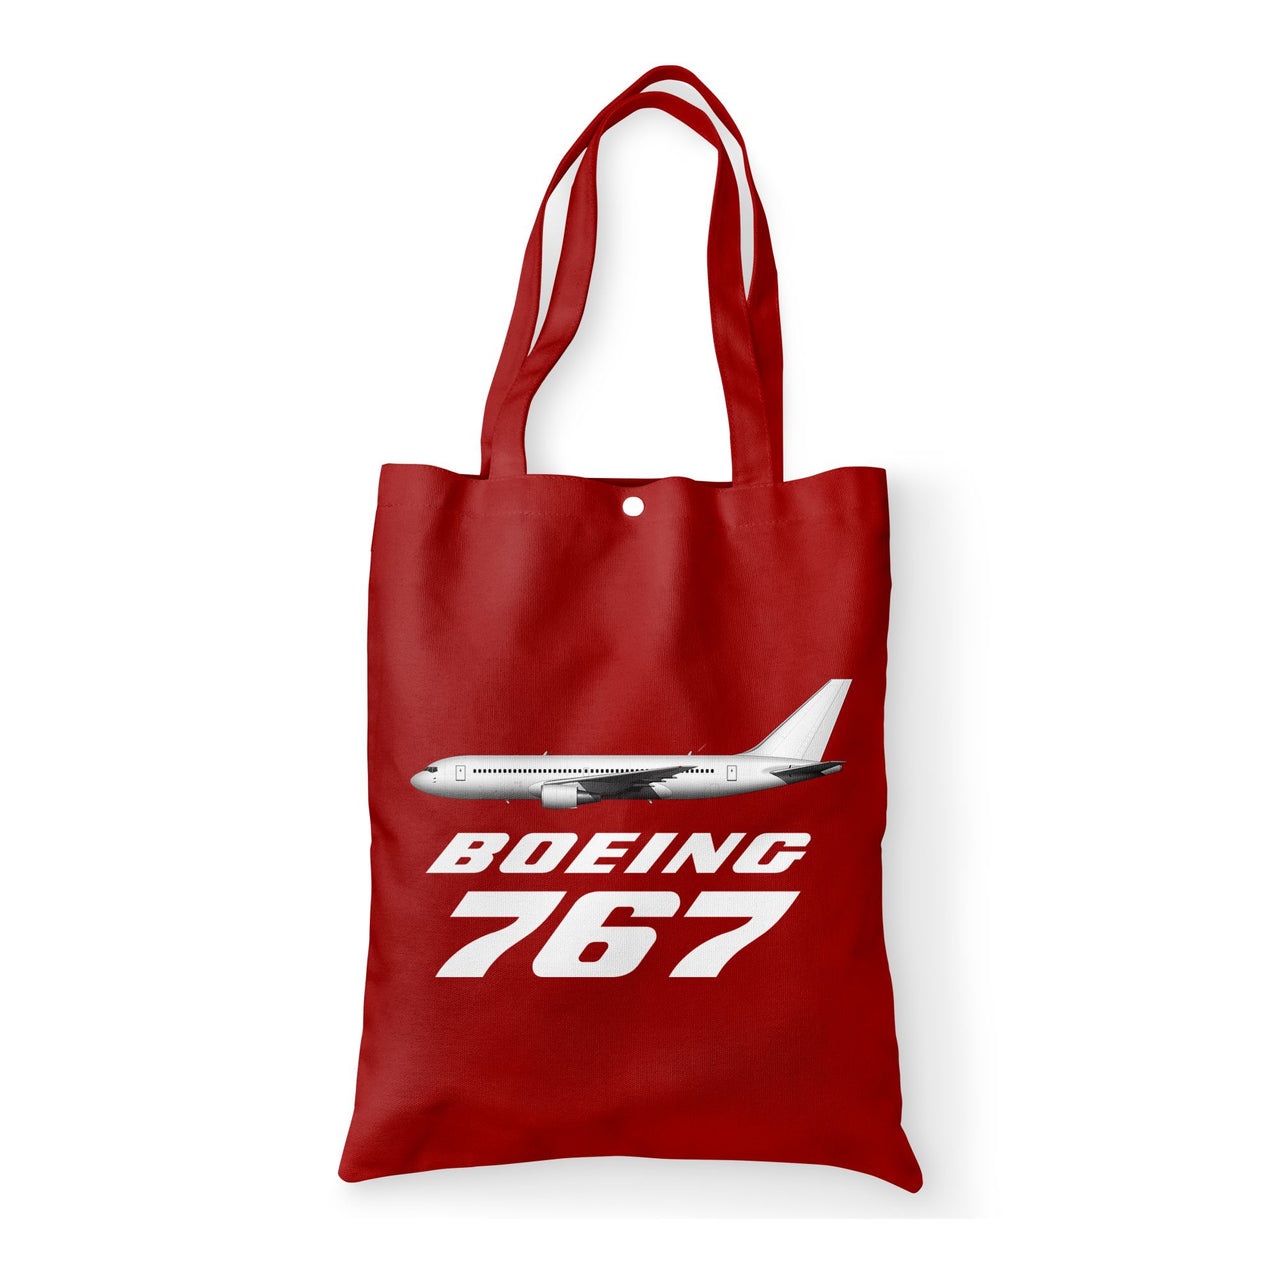 The Boeing 767 Designed Tote Bags